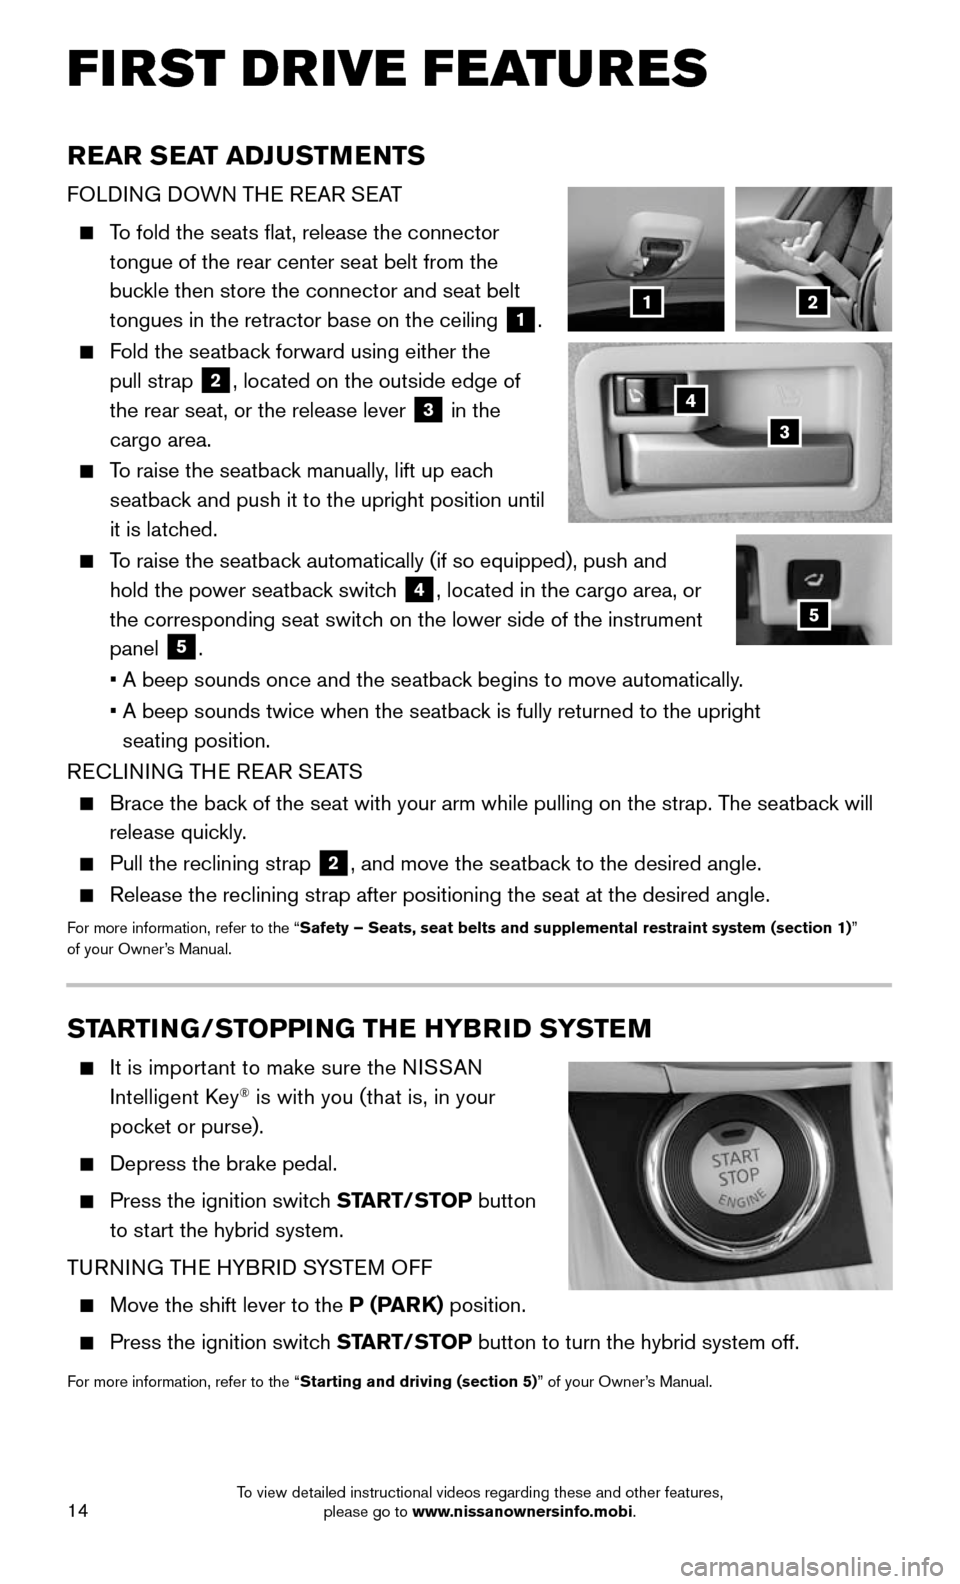 NISSAN MURANO HYBRID 2016 3.G Quick Reference Guide 14
FIRST DRIVE FEATURES
STARTING/STOPPING THE HYBRID SYSTEM
    It is important to make sure the NISSAN 
Intelligent Key® is with you (that is, in your   
pocket or purse).
    Depress the brake peda